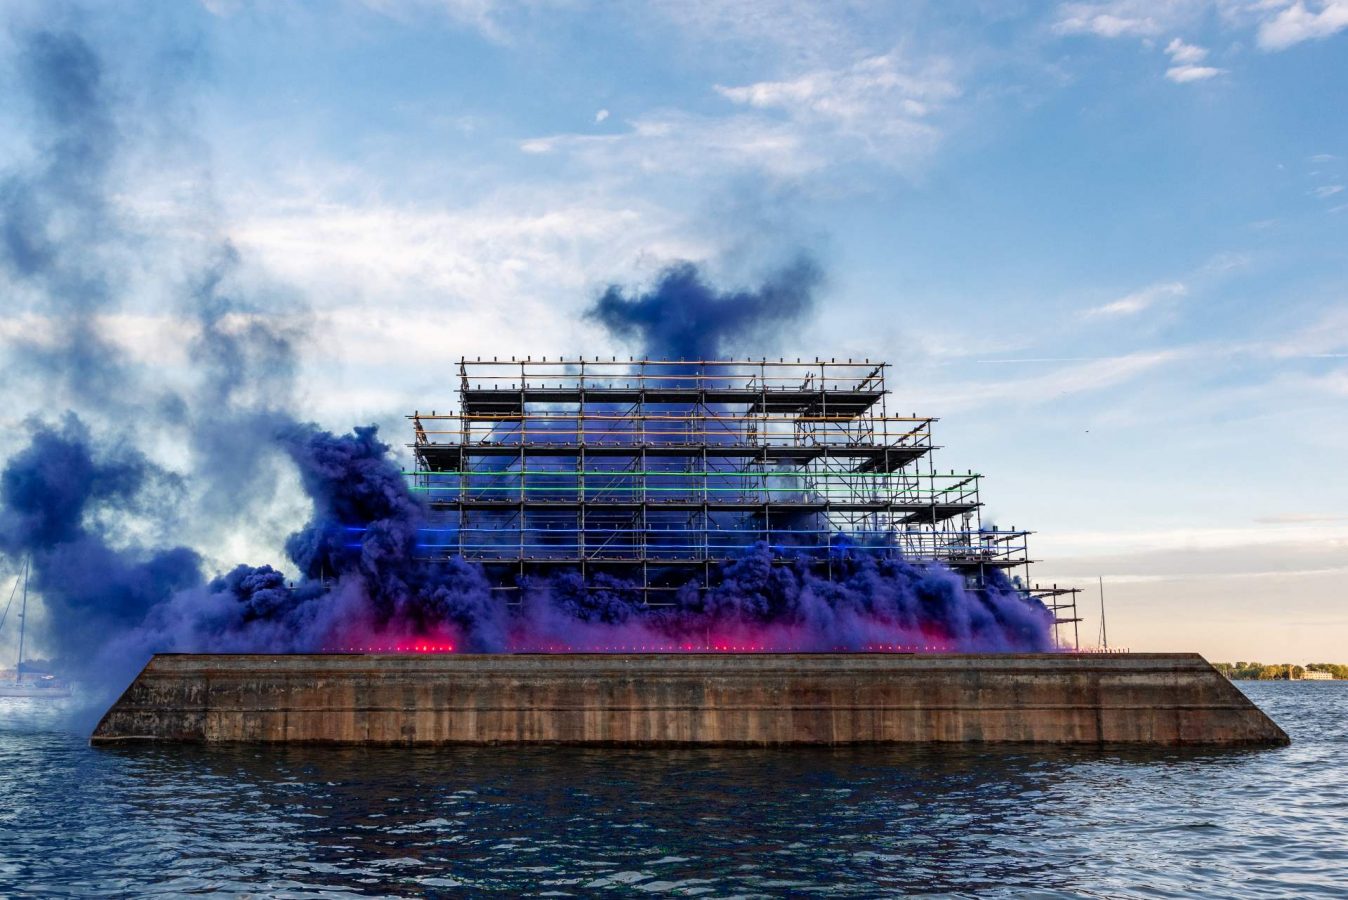 View of installation A Tribute to Toronto (2022) by Judy Chicago in collaboration with Pyro Spectaculars by Souza and Maude Furtado of GFA PYRO. Photo: Rebecca Tisdelle-Macias. Smoke Sculpture™ commissioned by the Toronto Biennial of Art and made possible with the generous support of the City of Toronto, ArtworxTO, the Delaney Family Foundation, Menkes Developments, Waterfront Toronto, the Waterfront BIA, and the Women Leading Initiative.